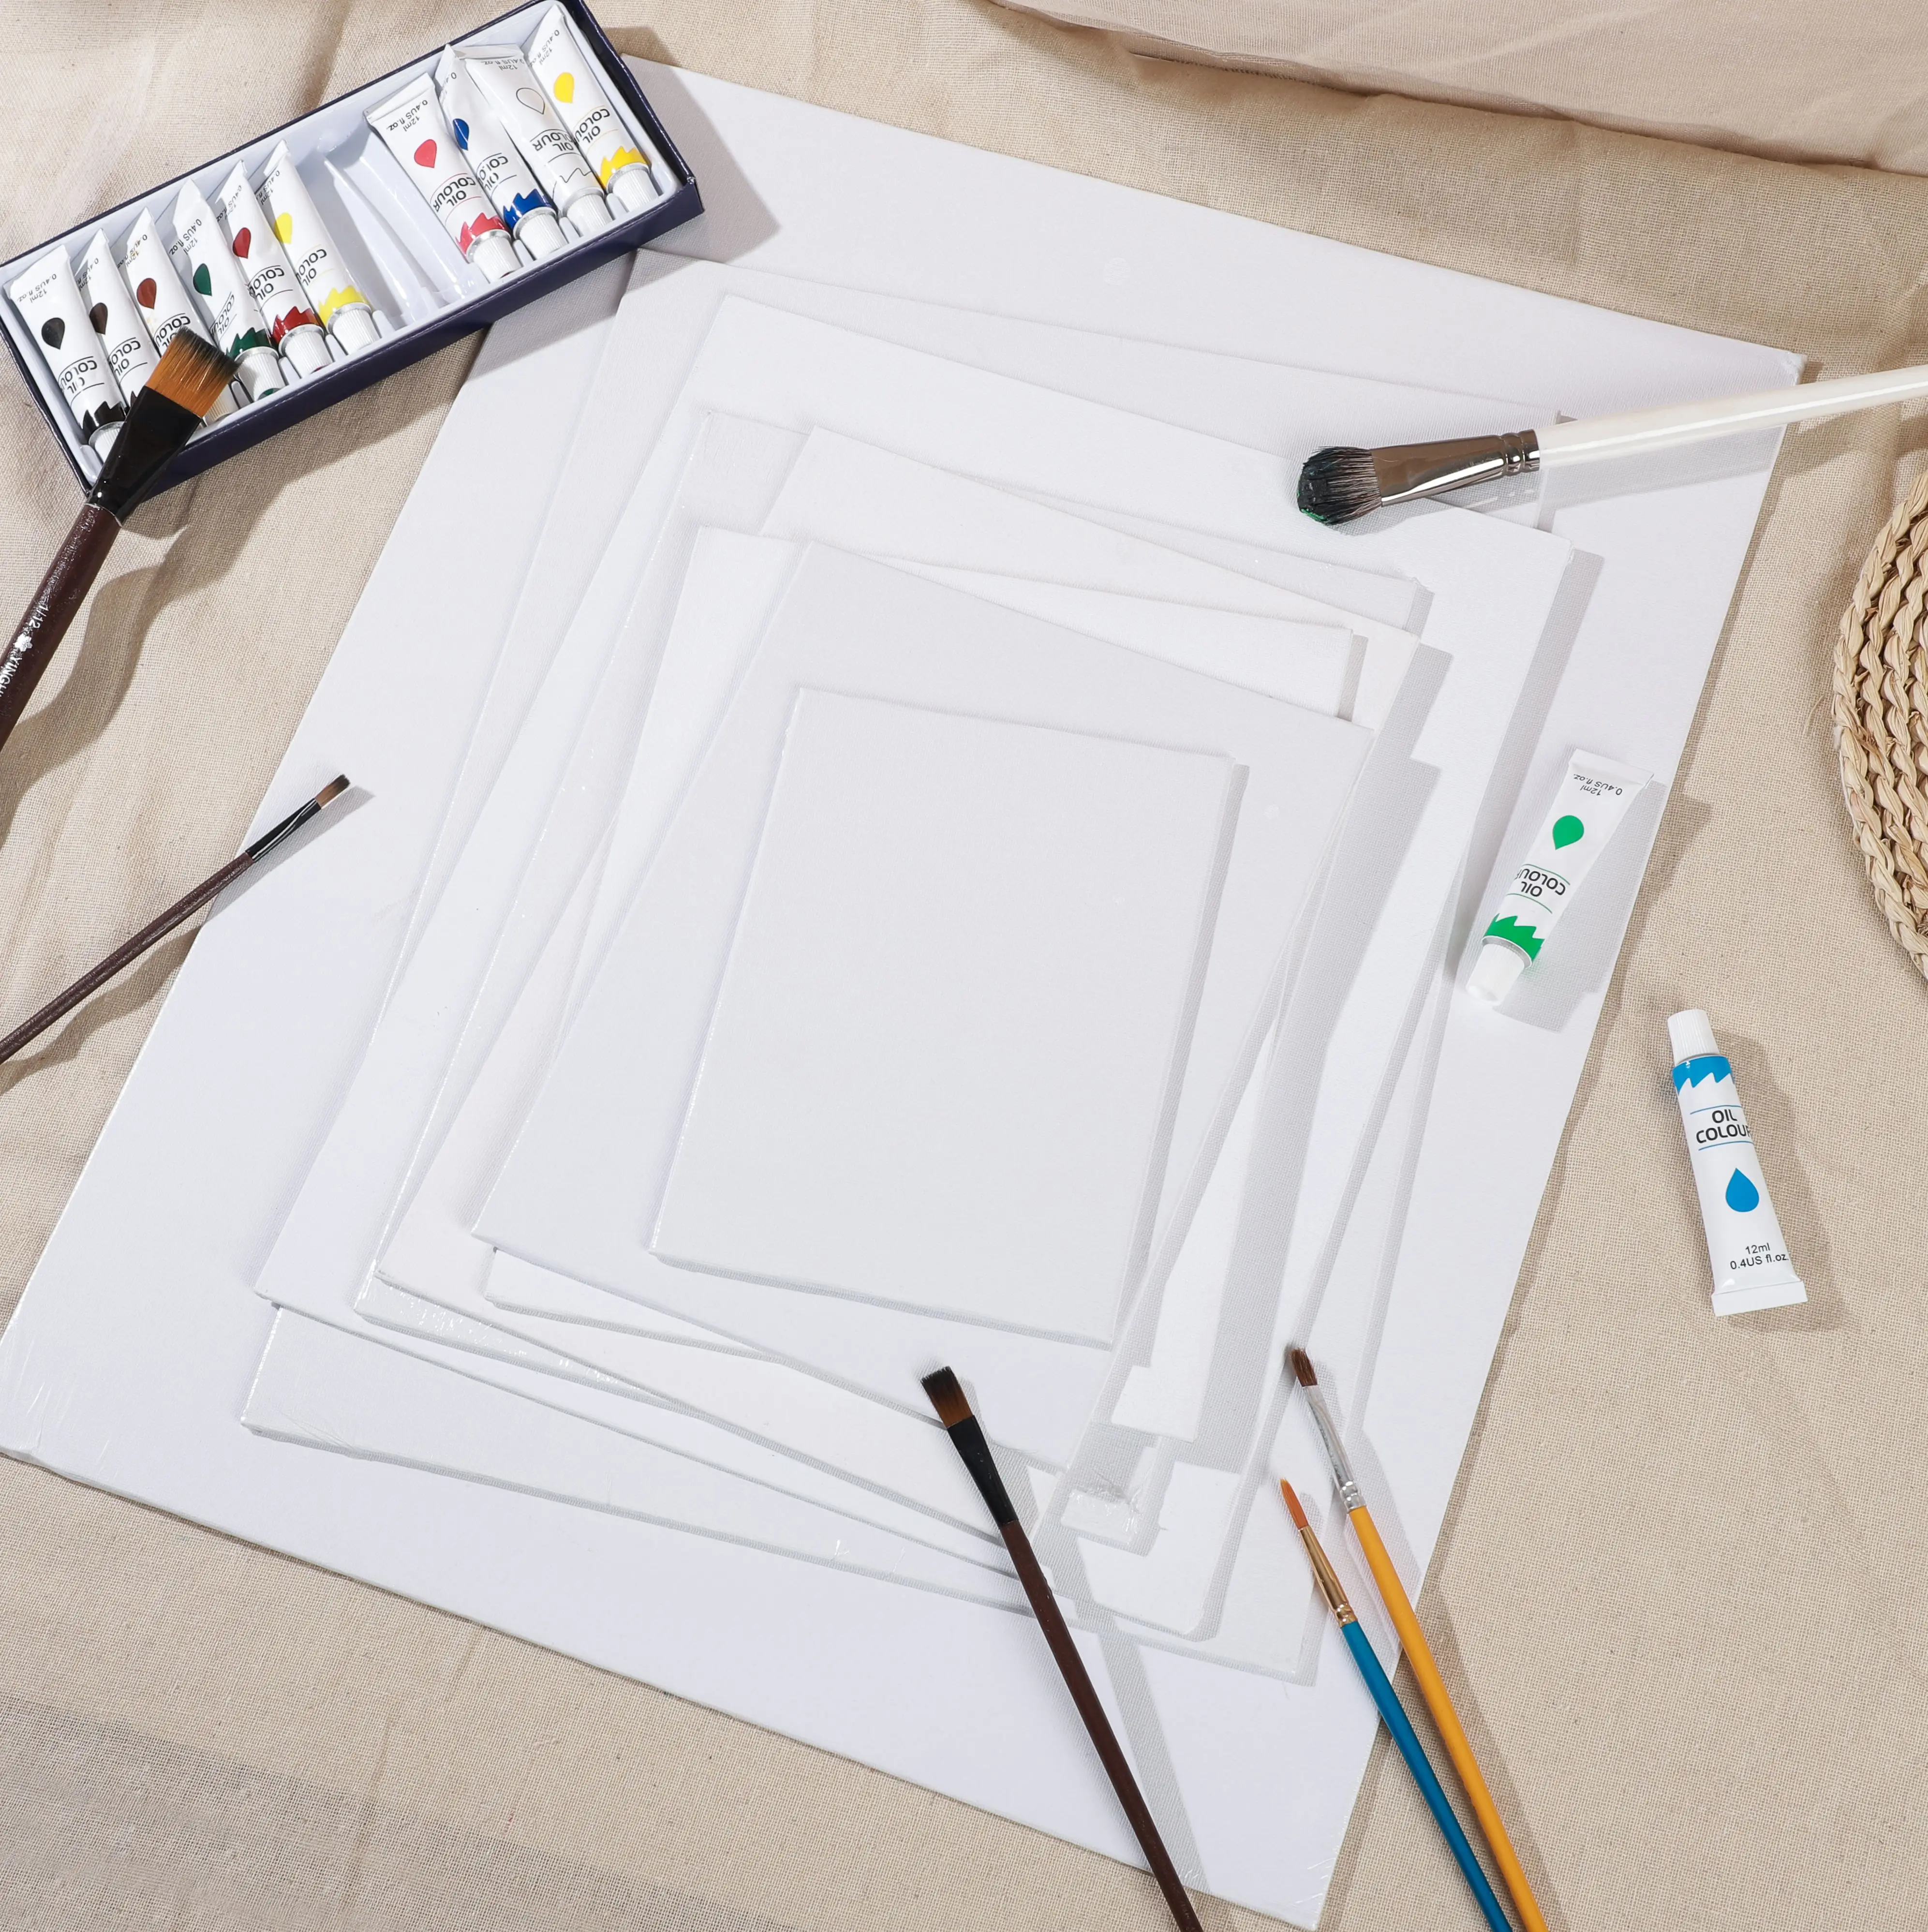 Painting blank canvas panels art supplies 100% cotton canvases boards